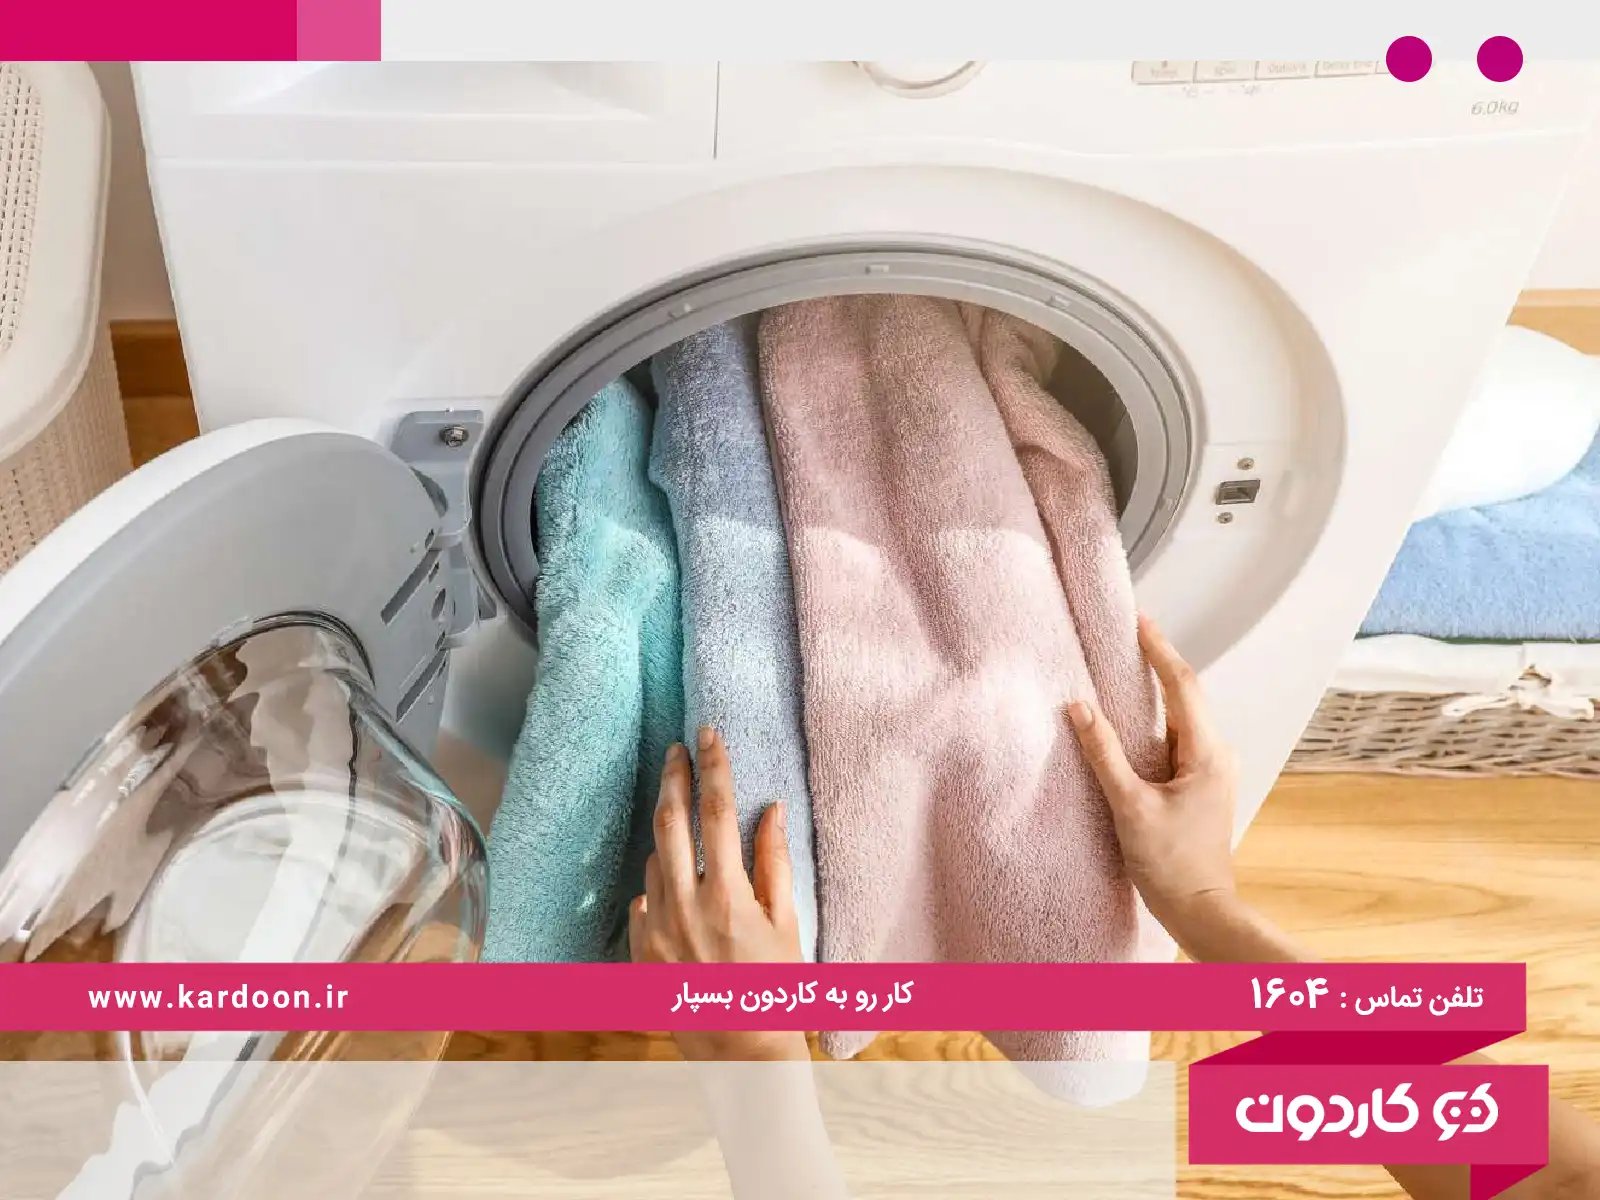 How to wash towels in the washing machine without damaging the machine